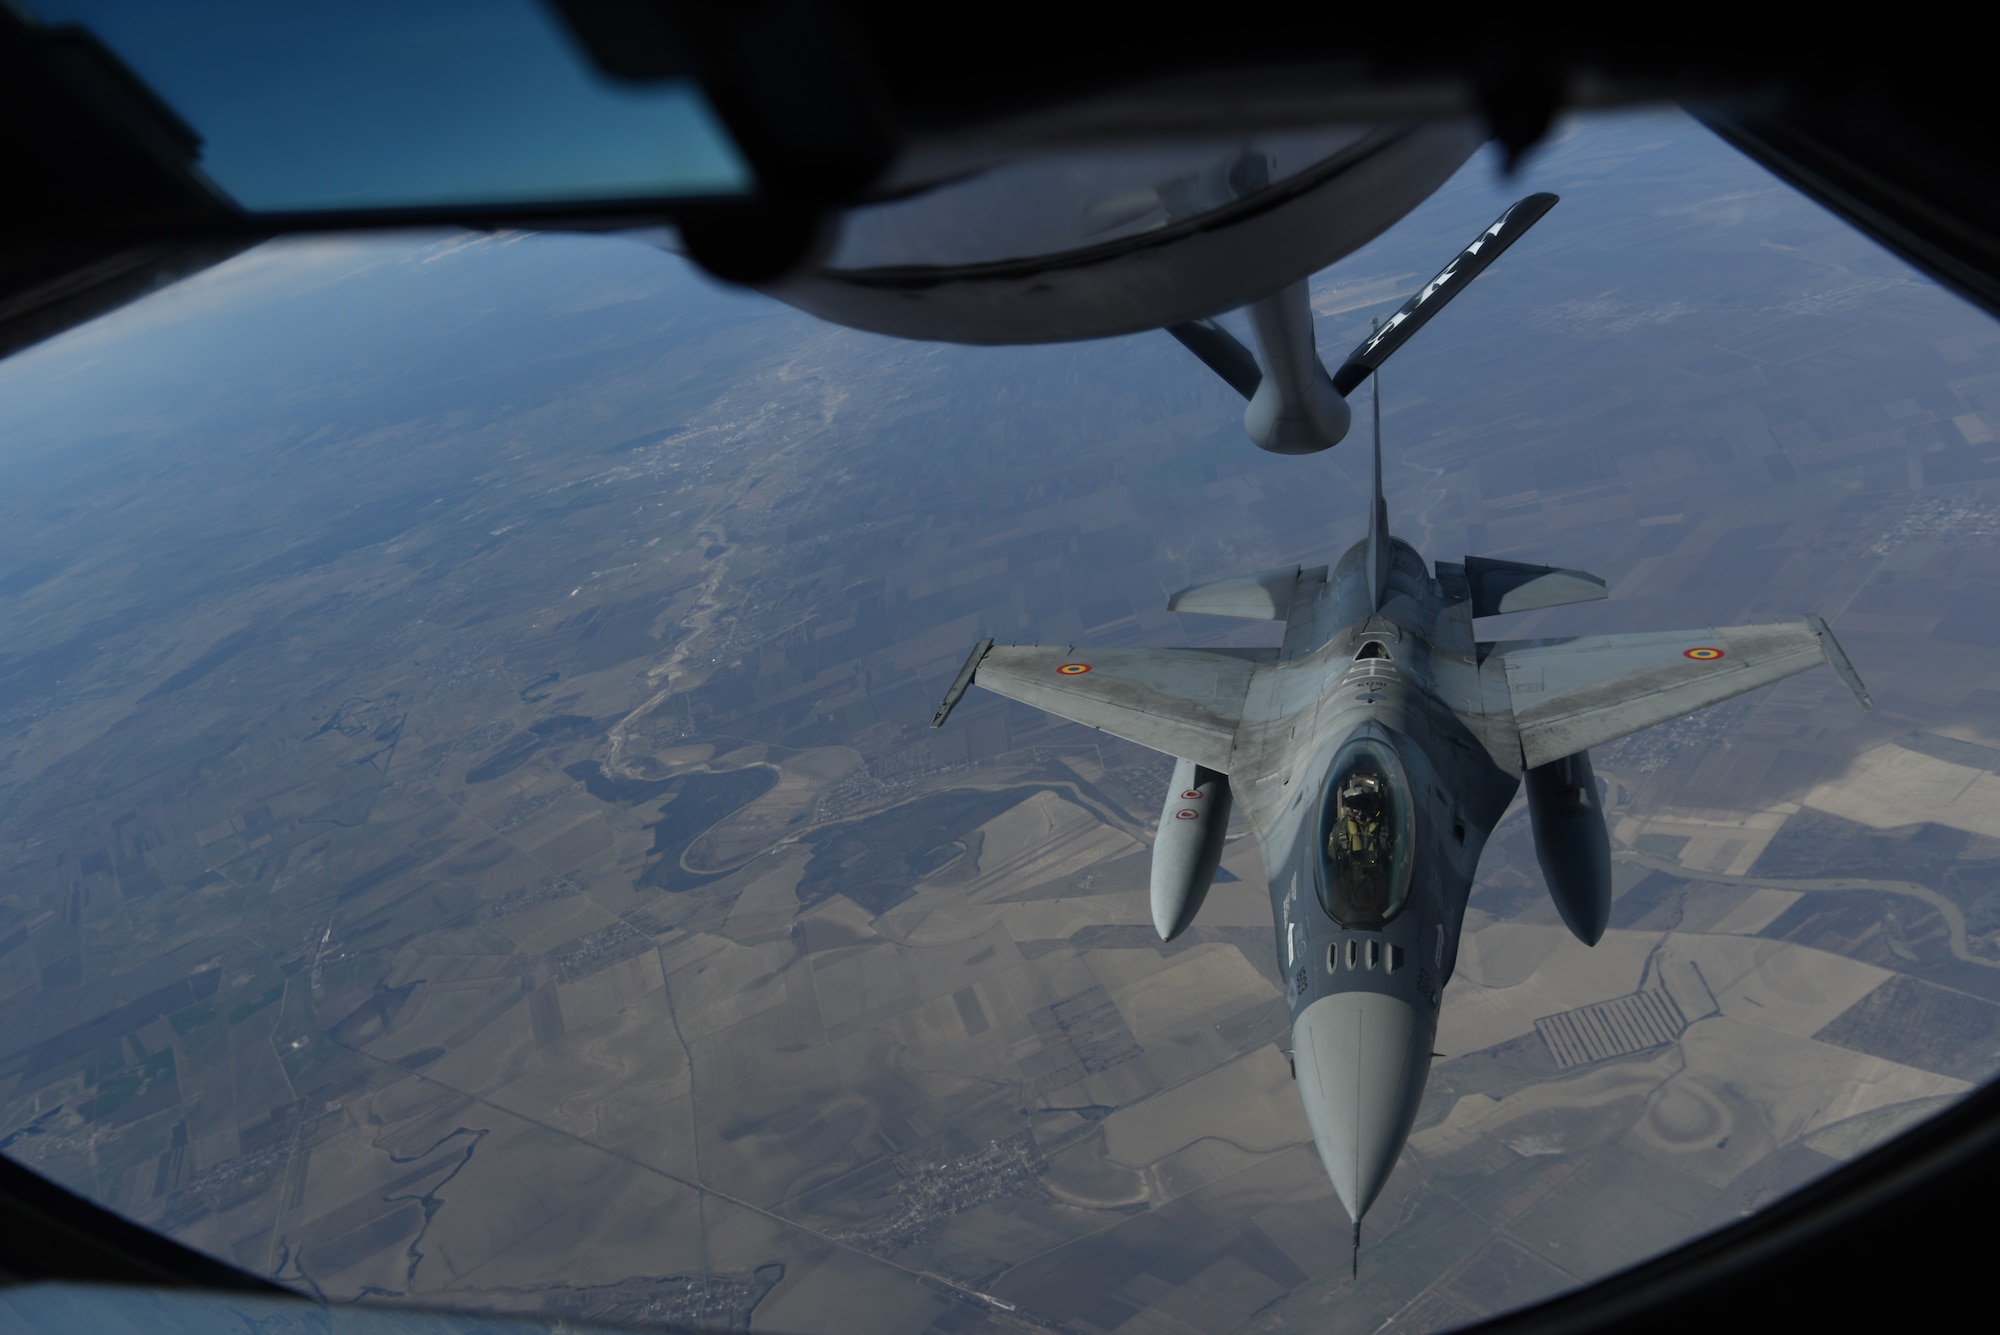 A Romanian air force F-16 receives fuel from a KC-135 Stratotanker from RAF Mildenhall, England during training over the skies of Romania, March 11, 2019. The training was an example of U.S. and NATO allies sharing a commitment to promote peace and stability through developing their relationship and communication process. (U.S. Air Force photo by Airman 1st Class Brandon Esau)